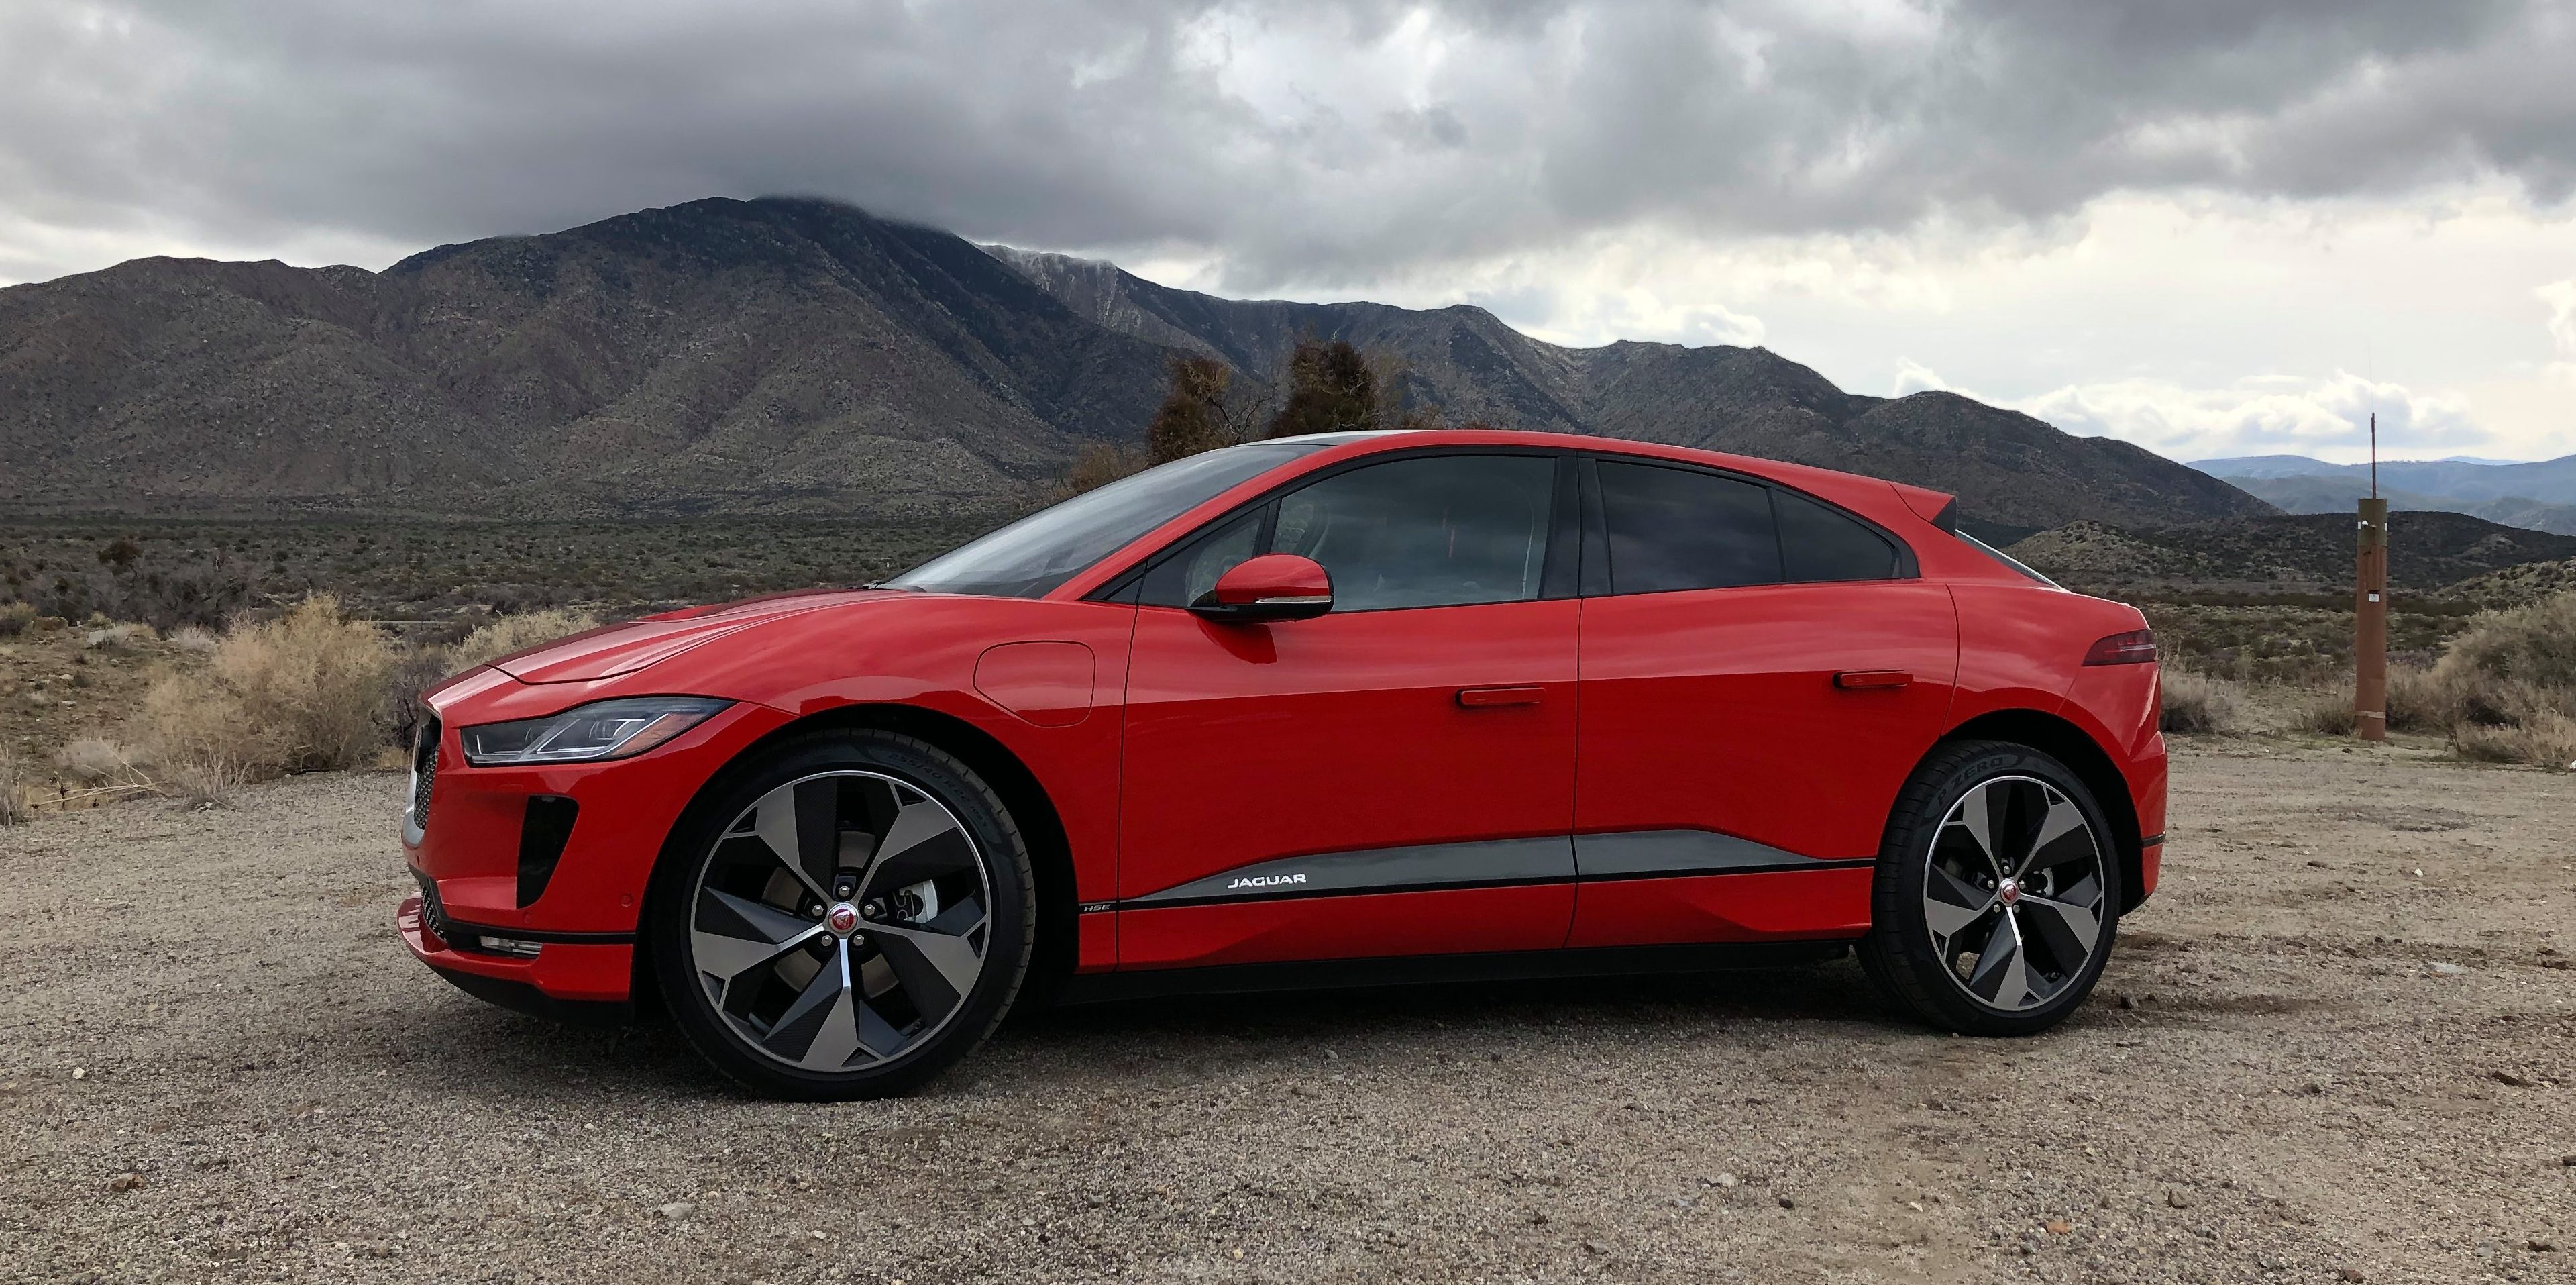 Jaguar dealers are offering whopping $20,000 discounts on the I-Pace EV -  Electrek